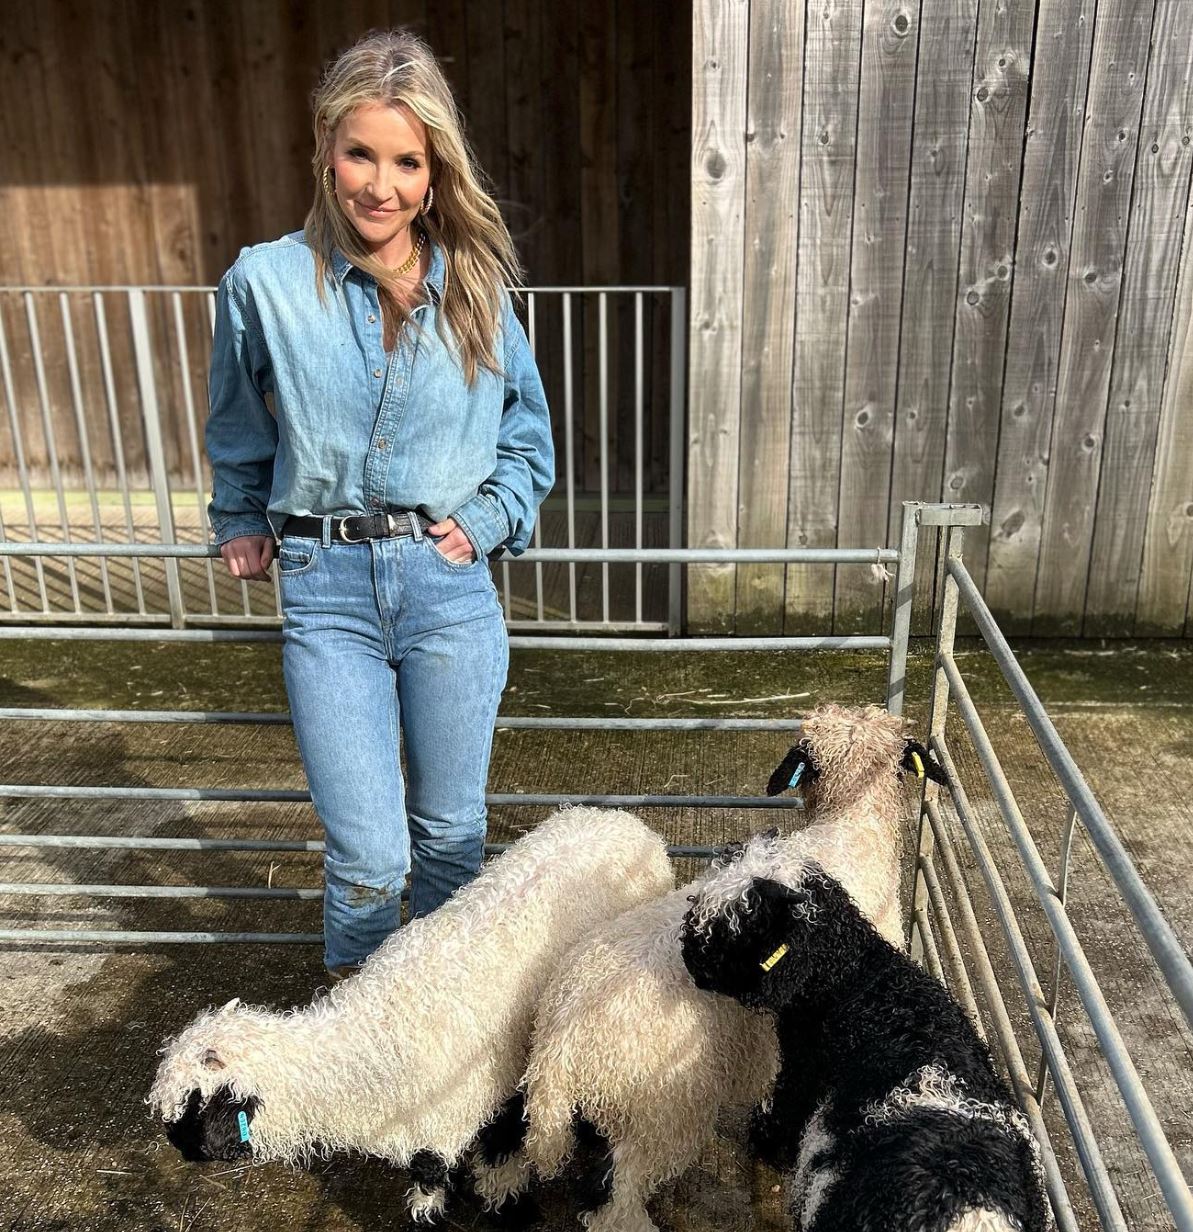 Springtime on the Farm’s Helen Skelton stuns fans as she ‘bring the glamour’ in smouldering behind-the-scenes pic